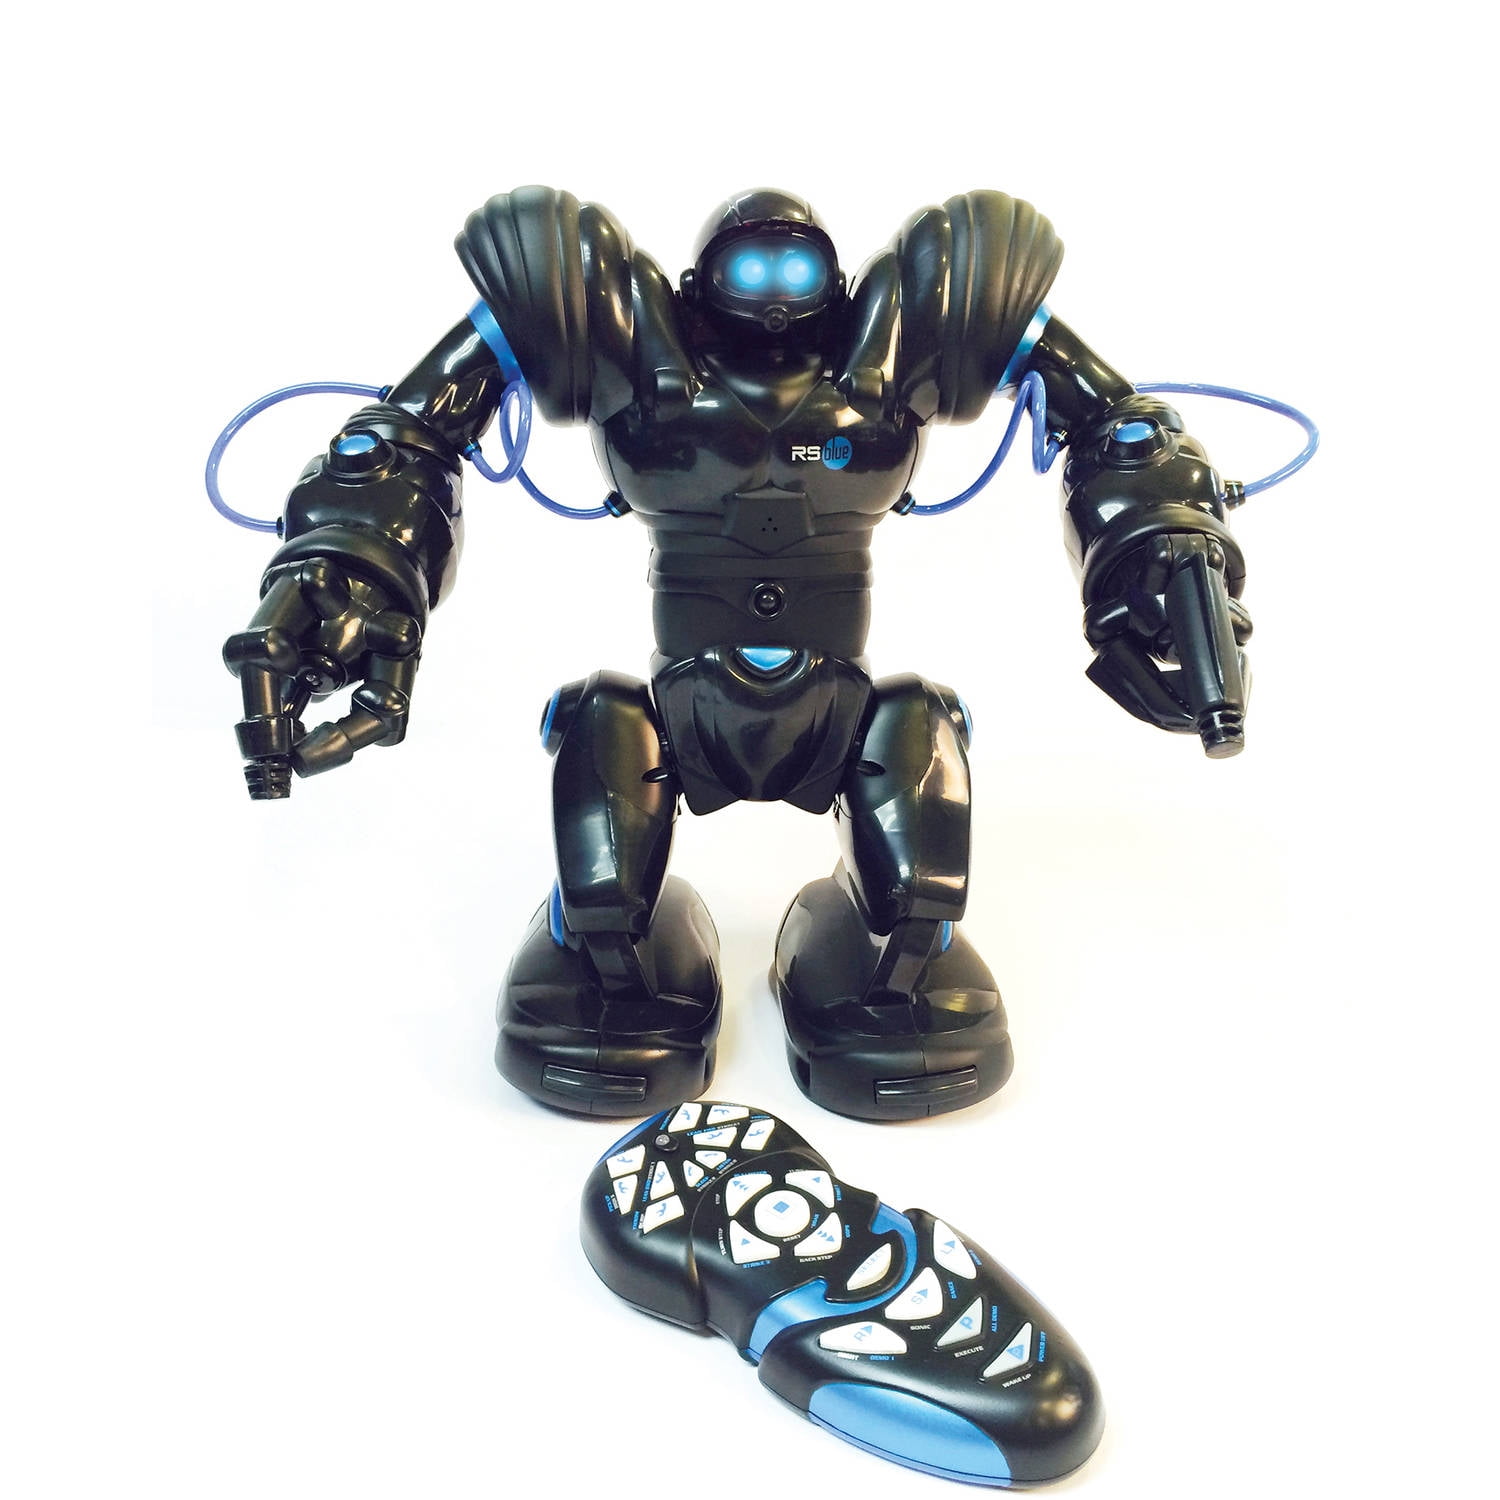 wowwee robosapien remote control replacement